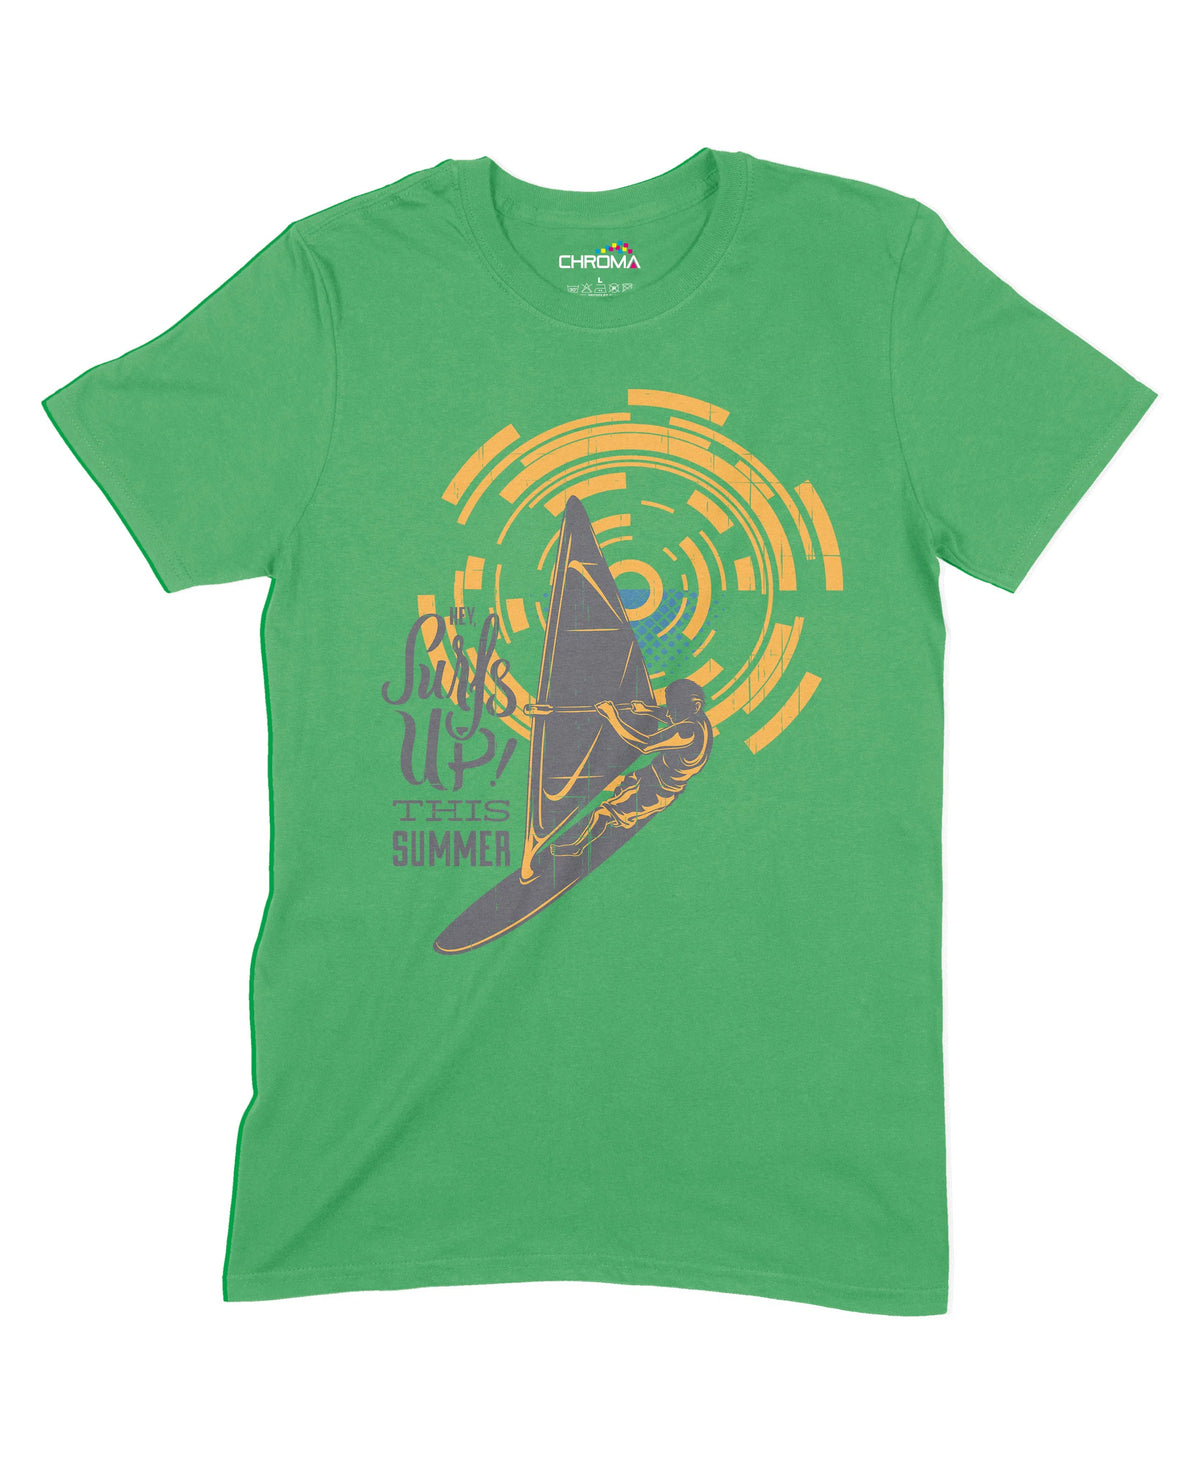 Surfs Up This Summer Unisex Adult T-Shirt Chroma Clothing